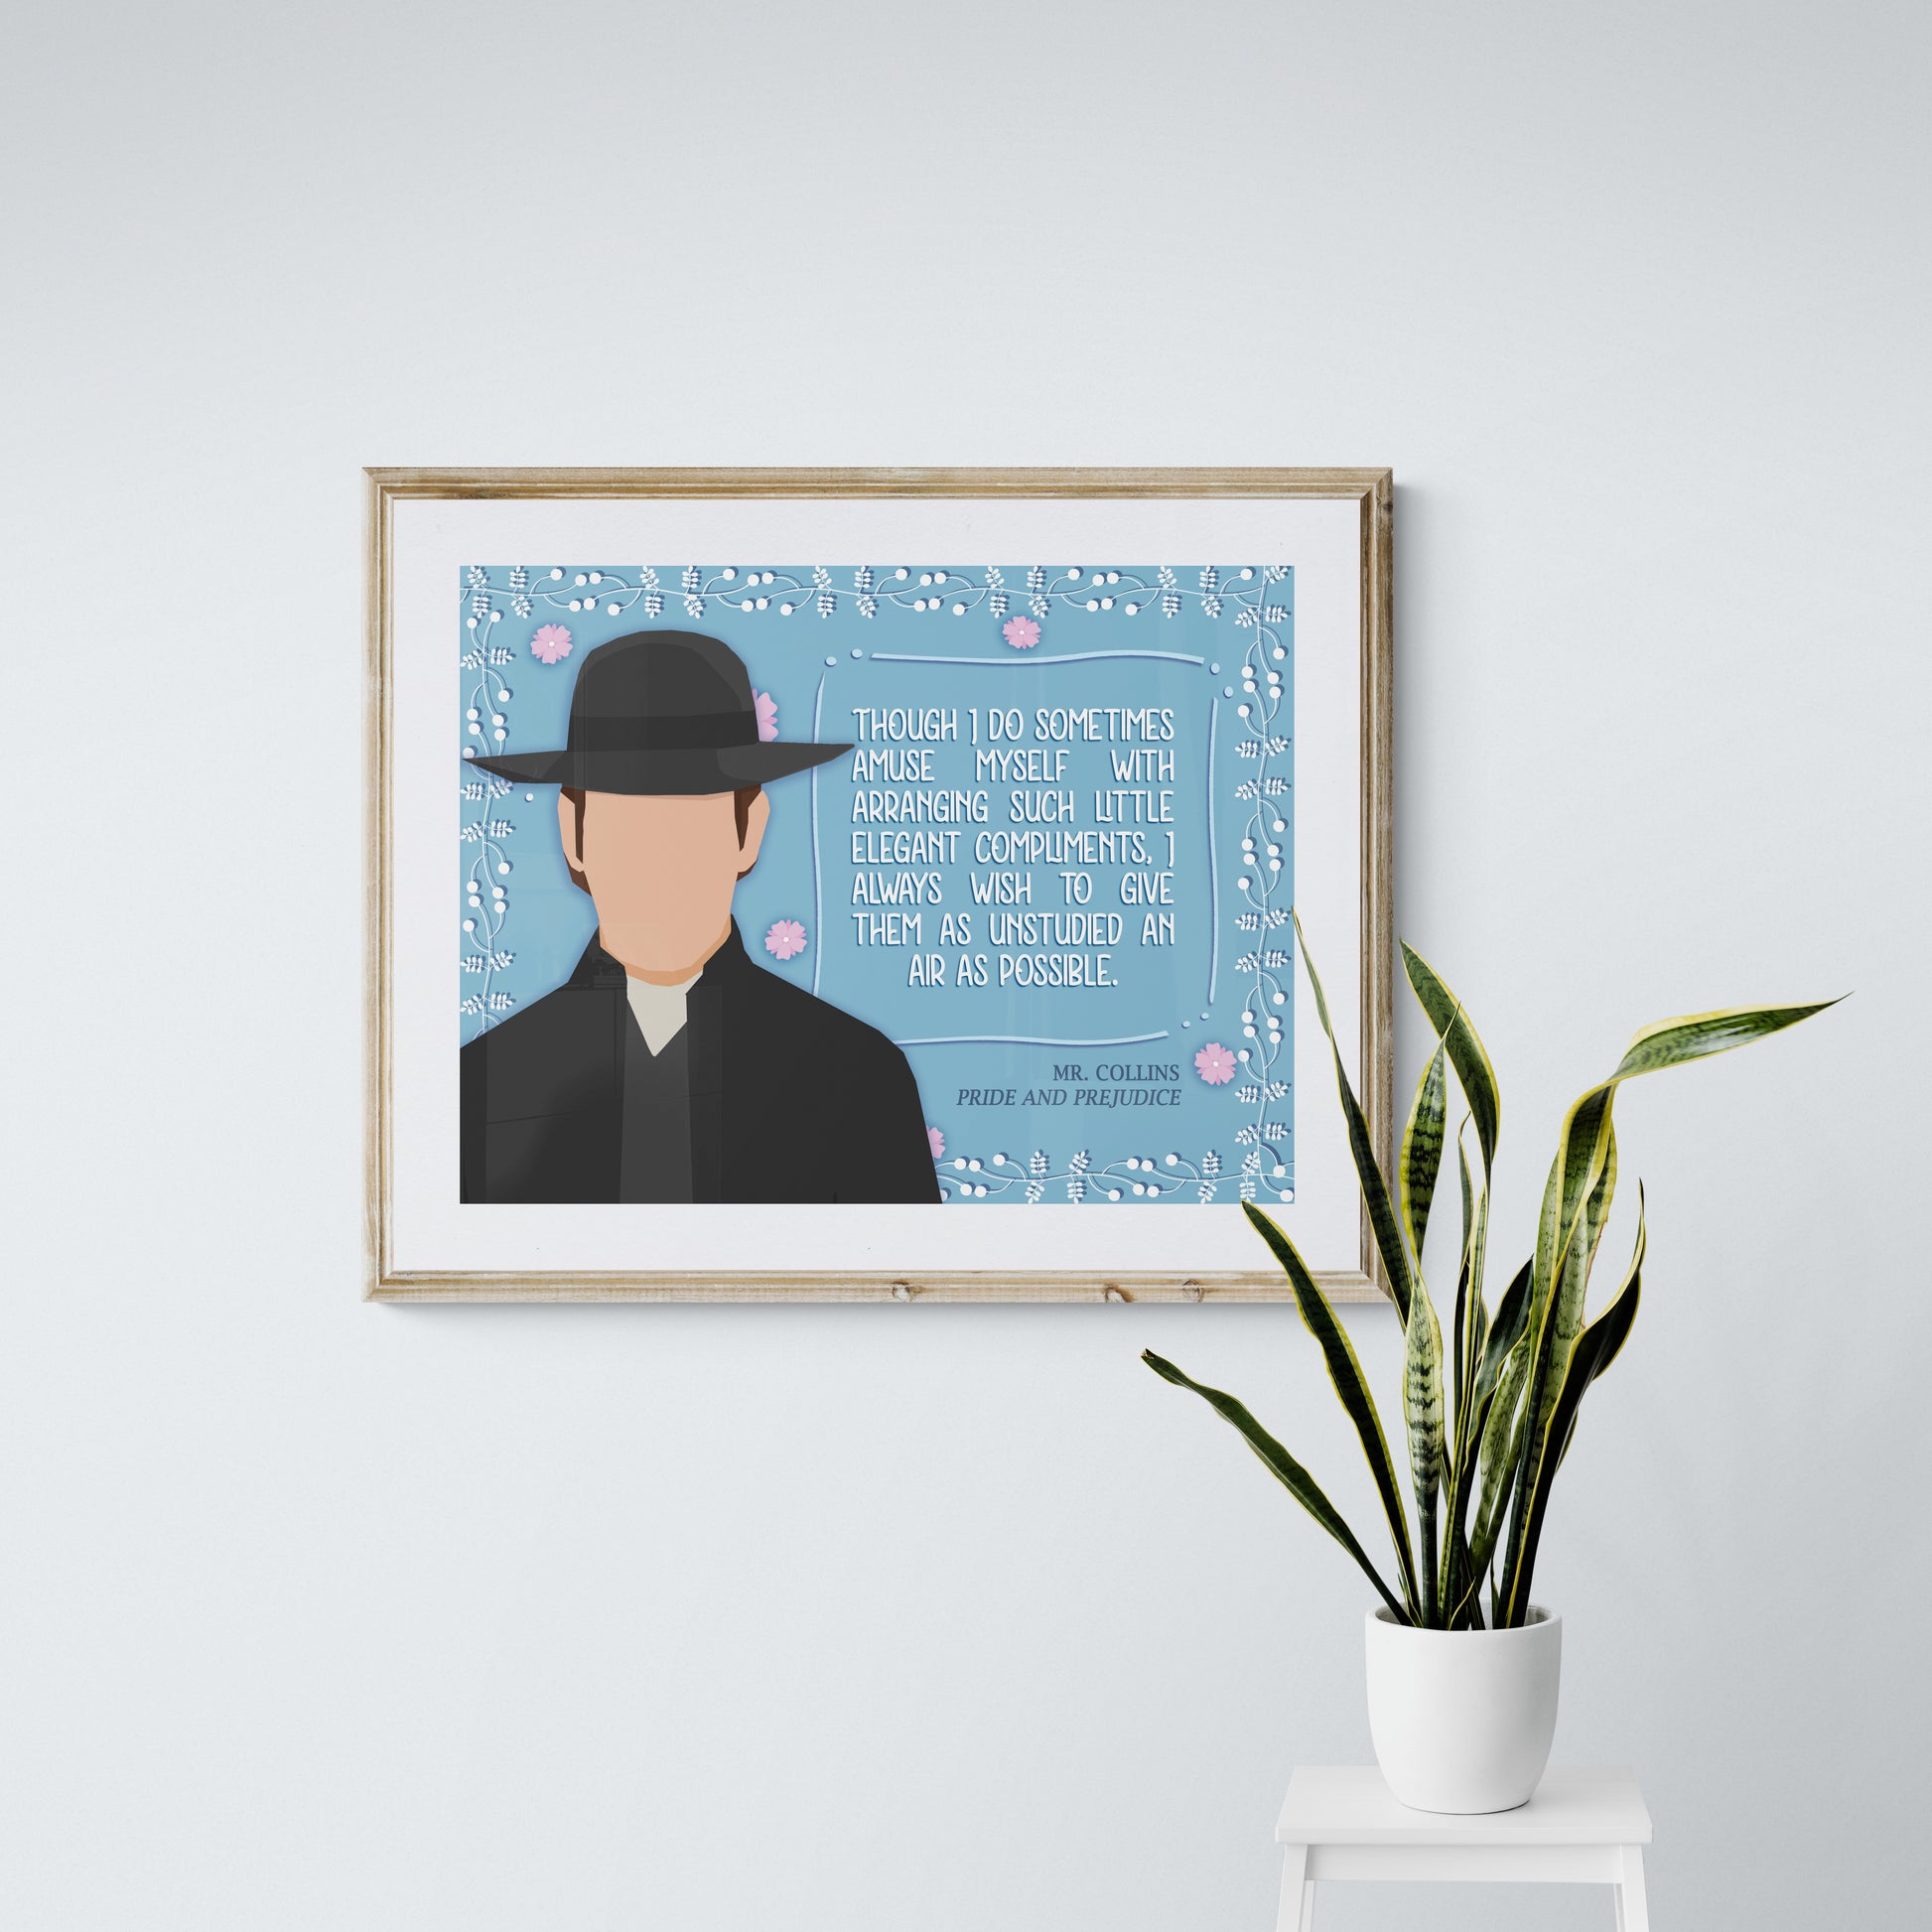 Mr. Collins - Elegant Compliments Funny Quote from Pride and Prejudice art print